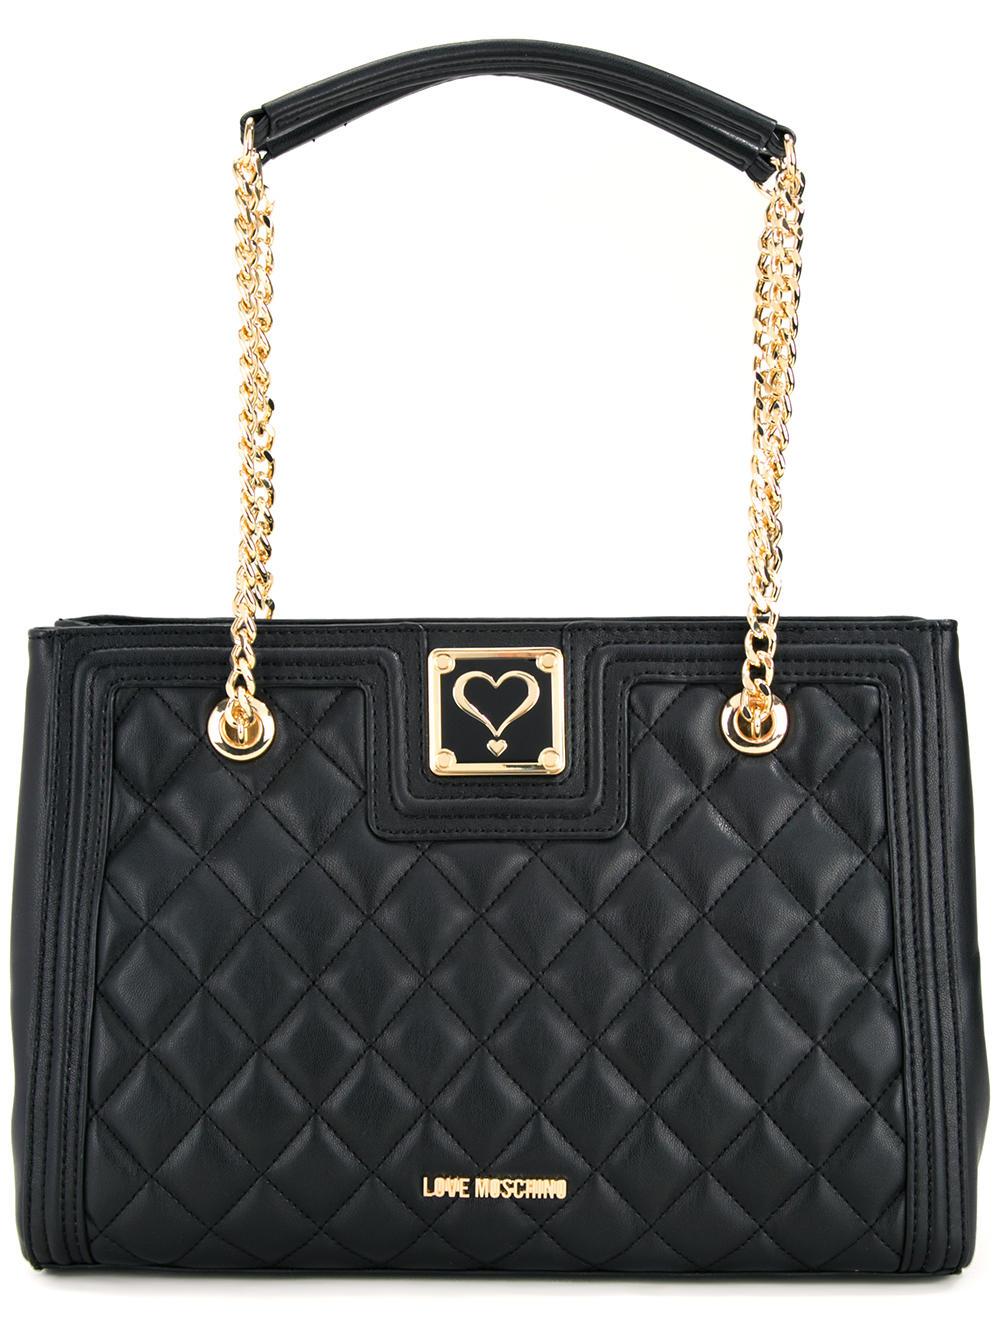 Lyst - Love Moschino Quilted Shoulder Bag in Black